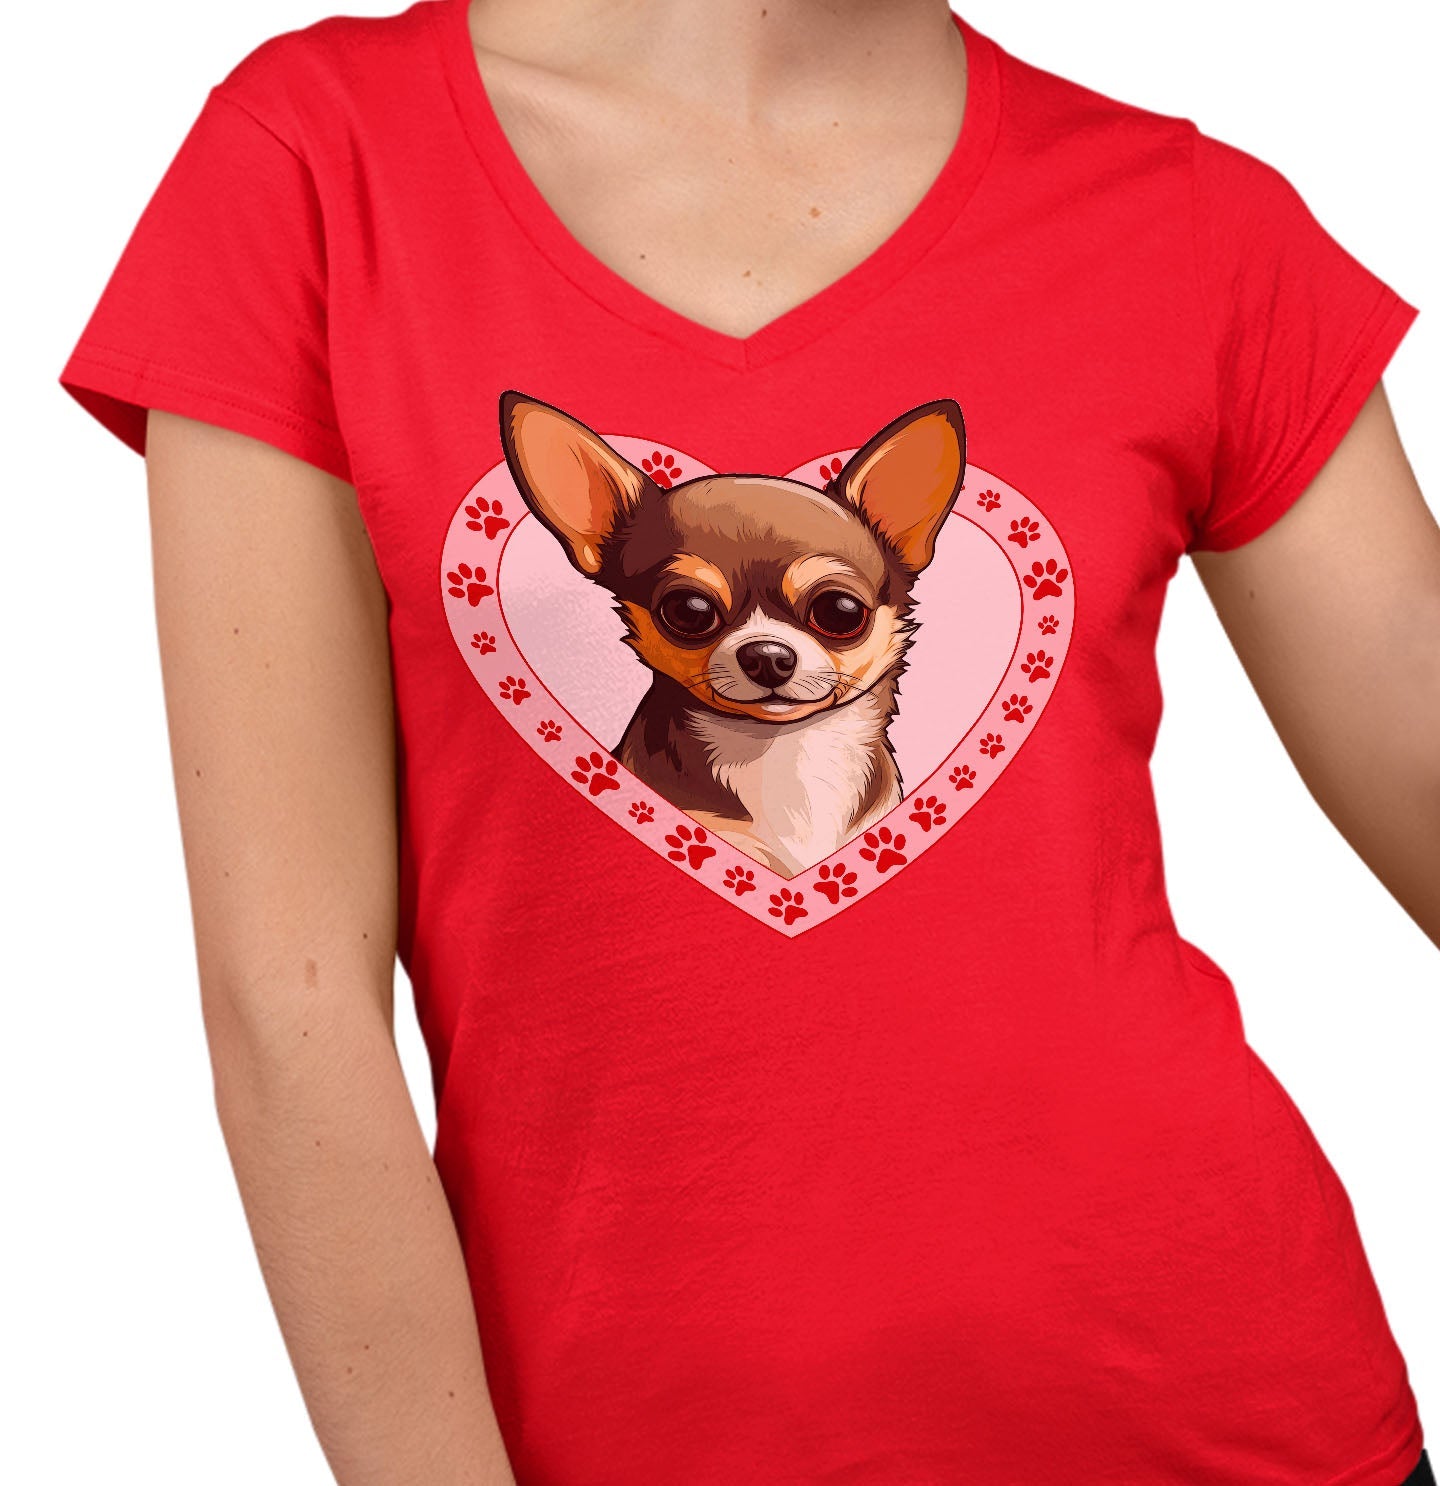 Chihuahua (Chocolate & Tan) Illustration In Heart - Women's V-Neck T-Shirt